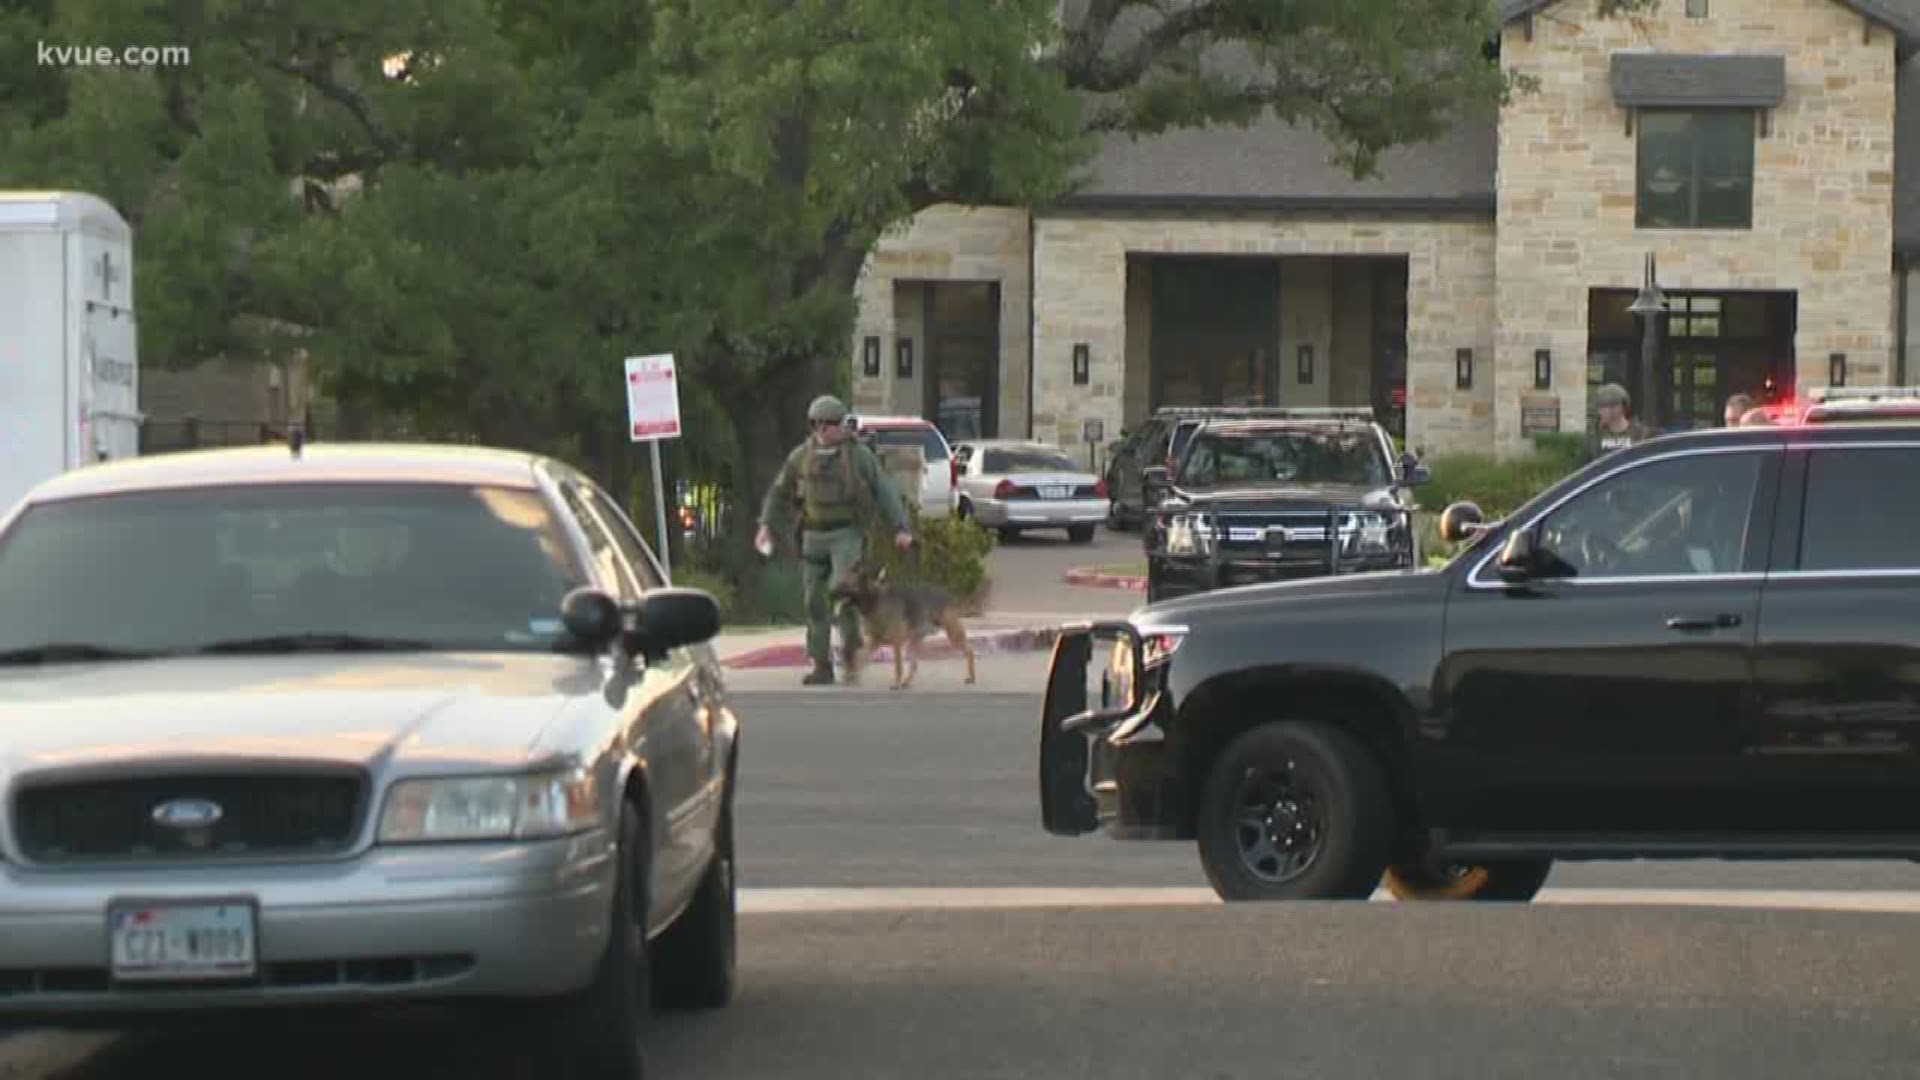 Multiple crews responded to reports of a barricaded subject in a northwest Austin apartment unit Thursday evening, but once the unit was cleared, no subject was found inside.